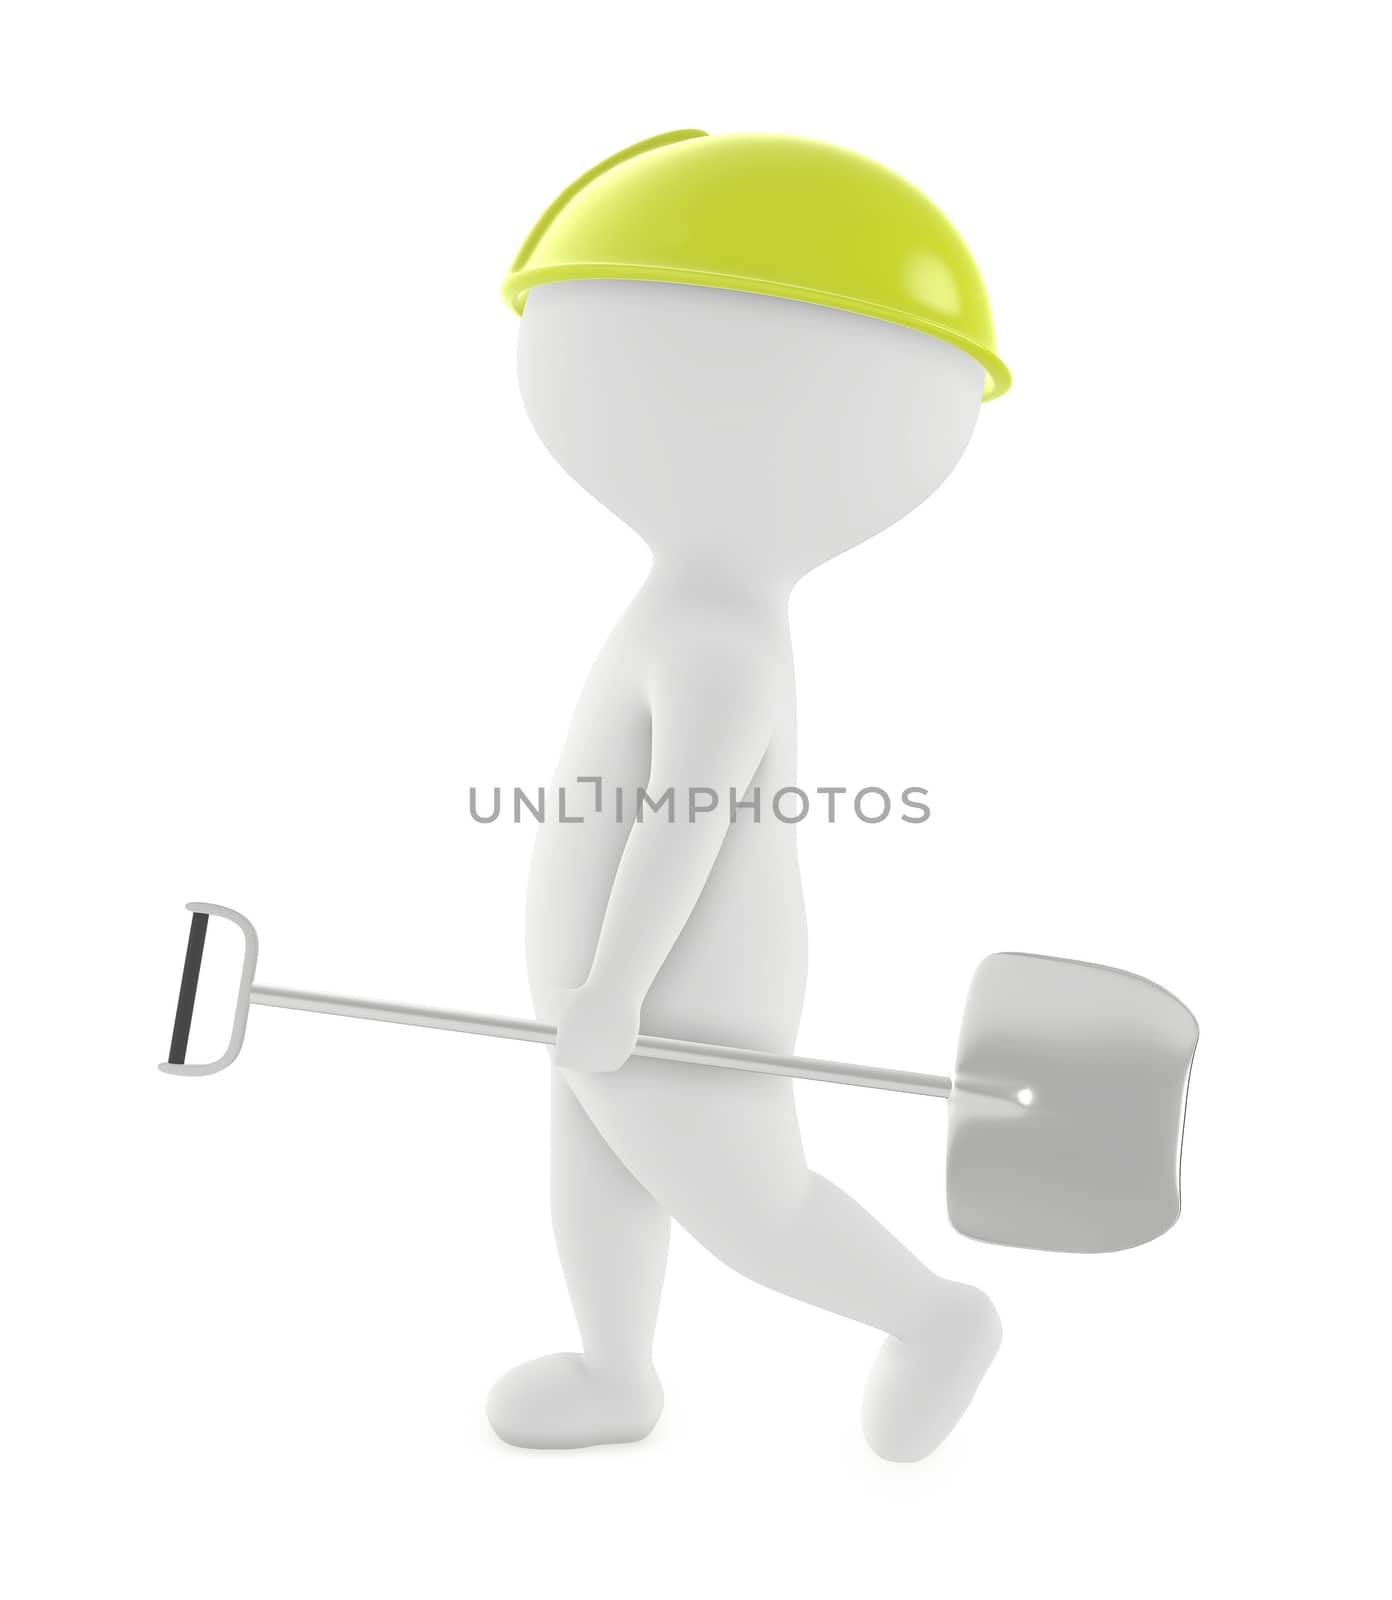 3d character , man wearing safety cap and walking with a shovel in his hand- 3d rendering